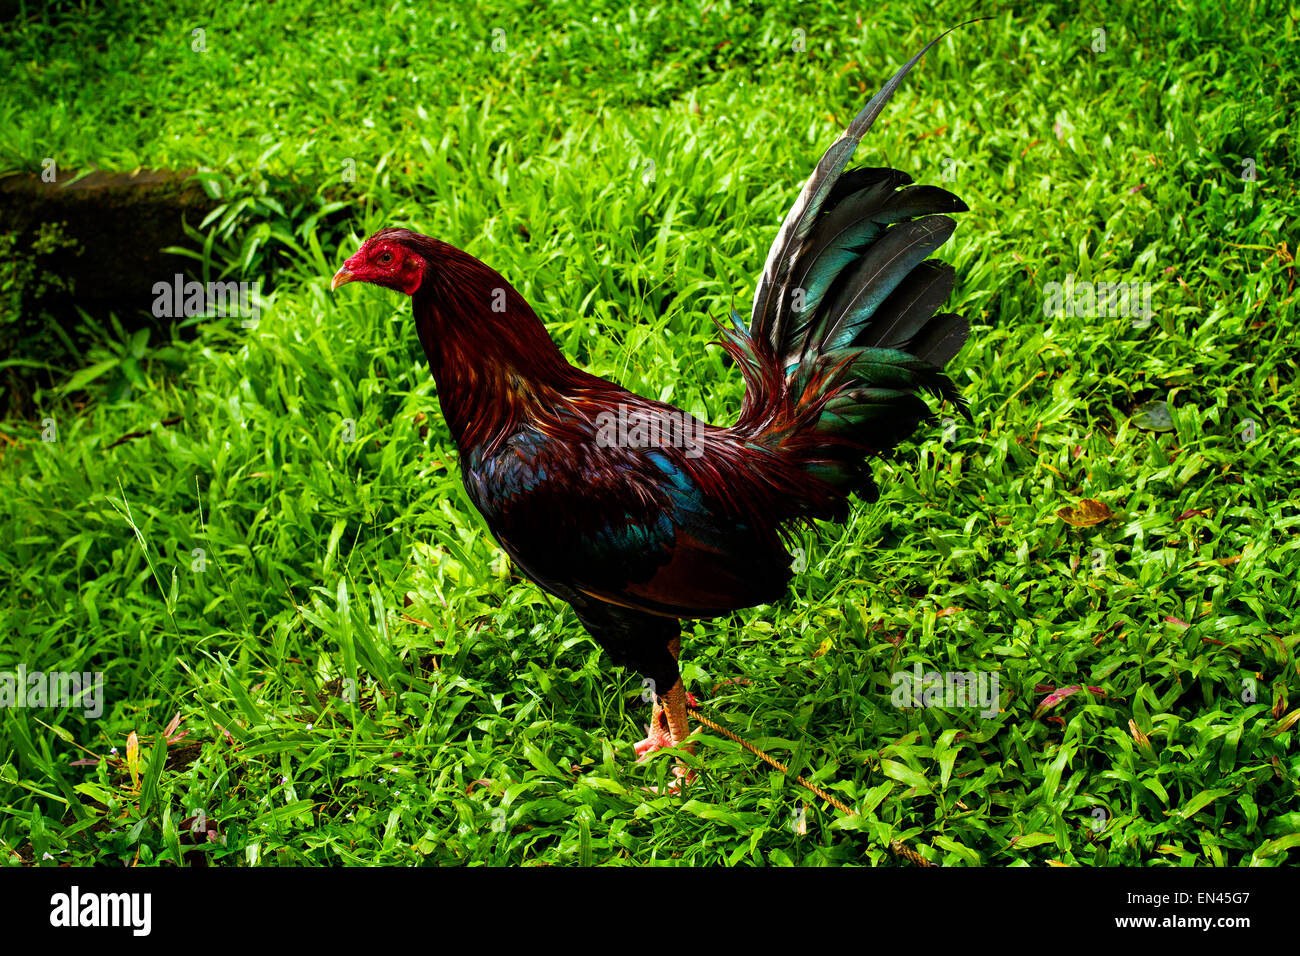 A rooster stands in the grass in the city of Famy, province of Laguna, Philippines on 25 December 2014. Stock Photo